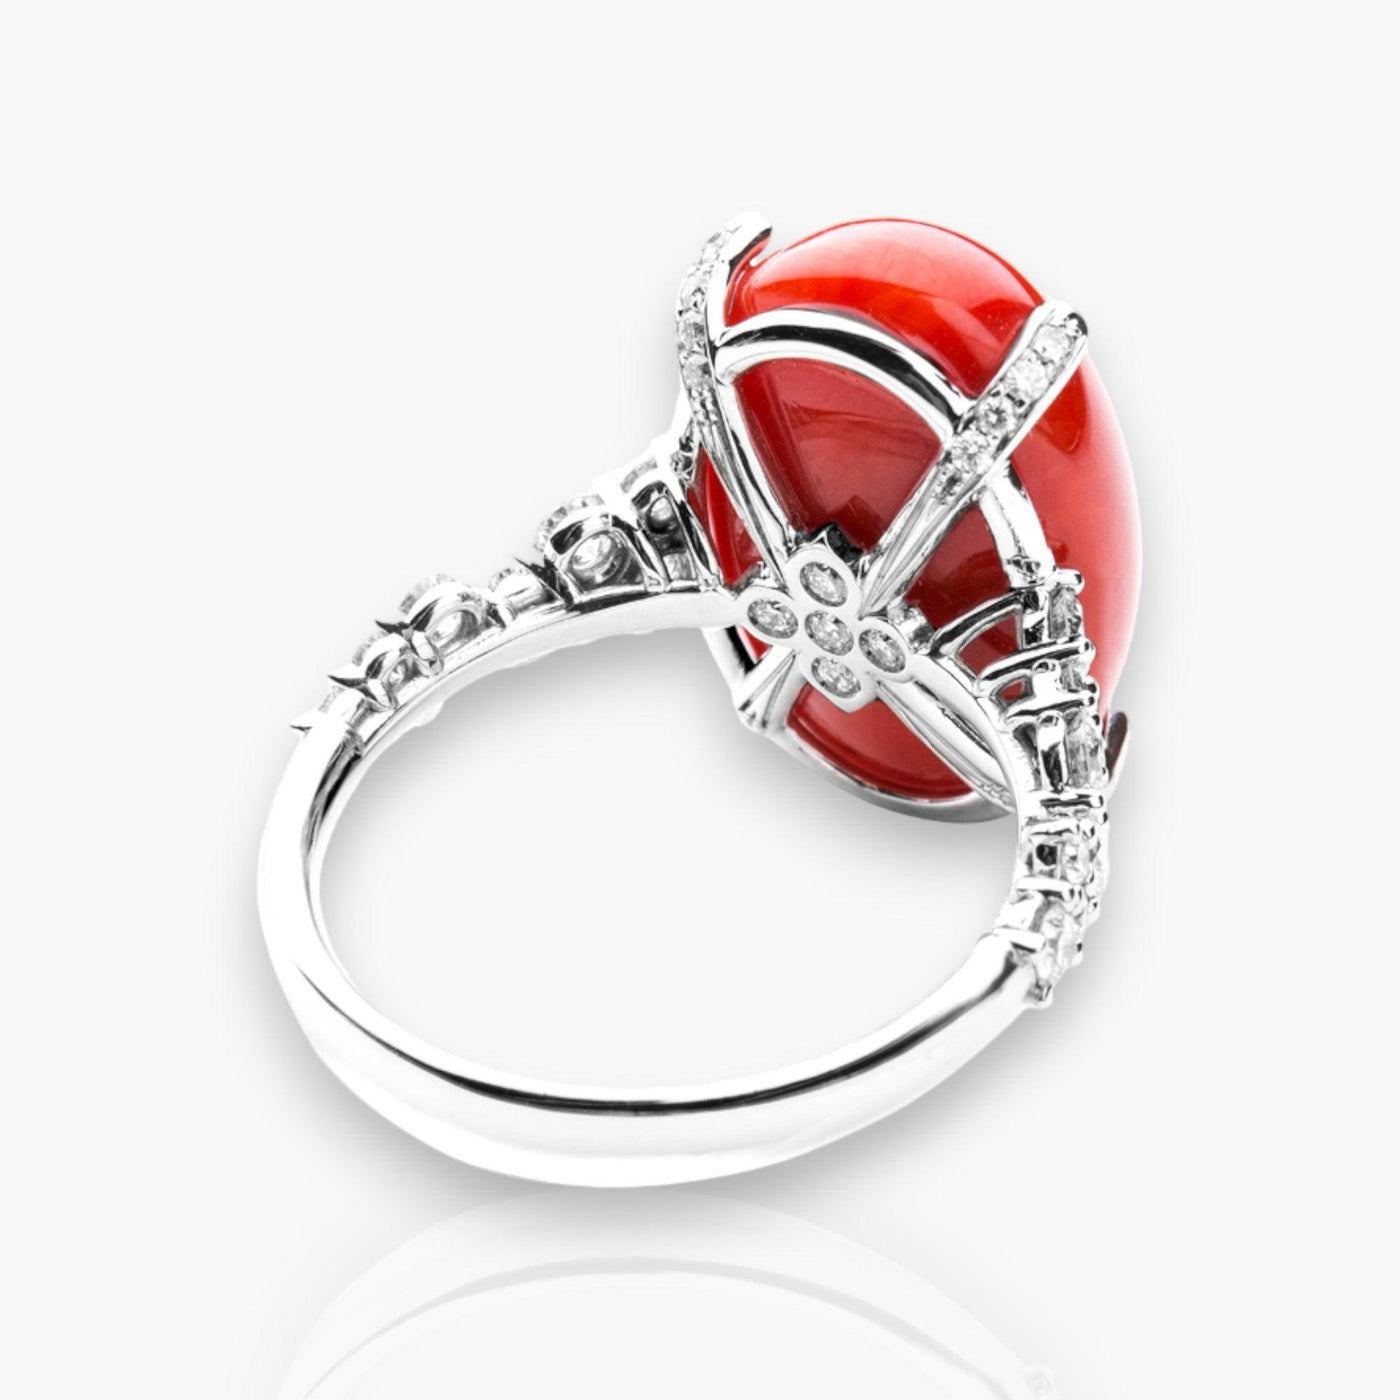 RED MOON Ring - Moregola Fine Jewelry